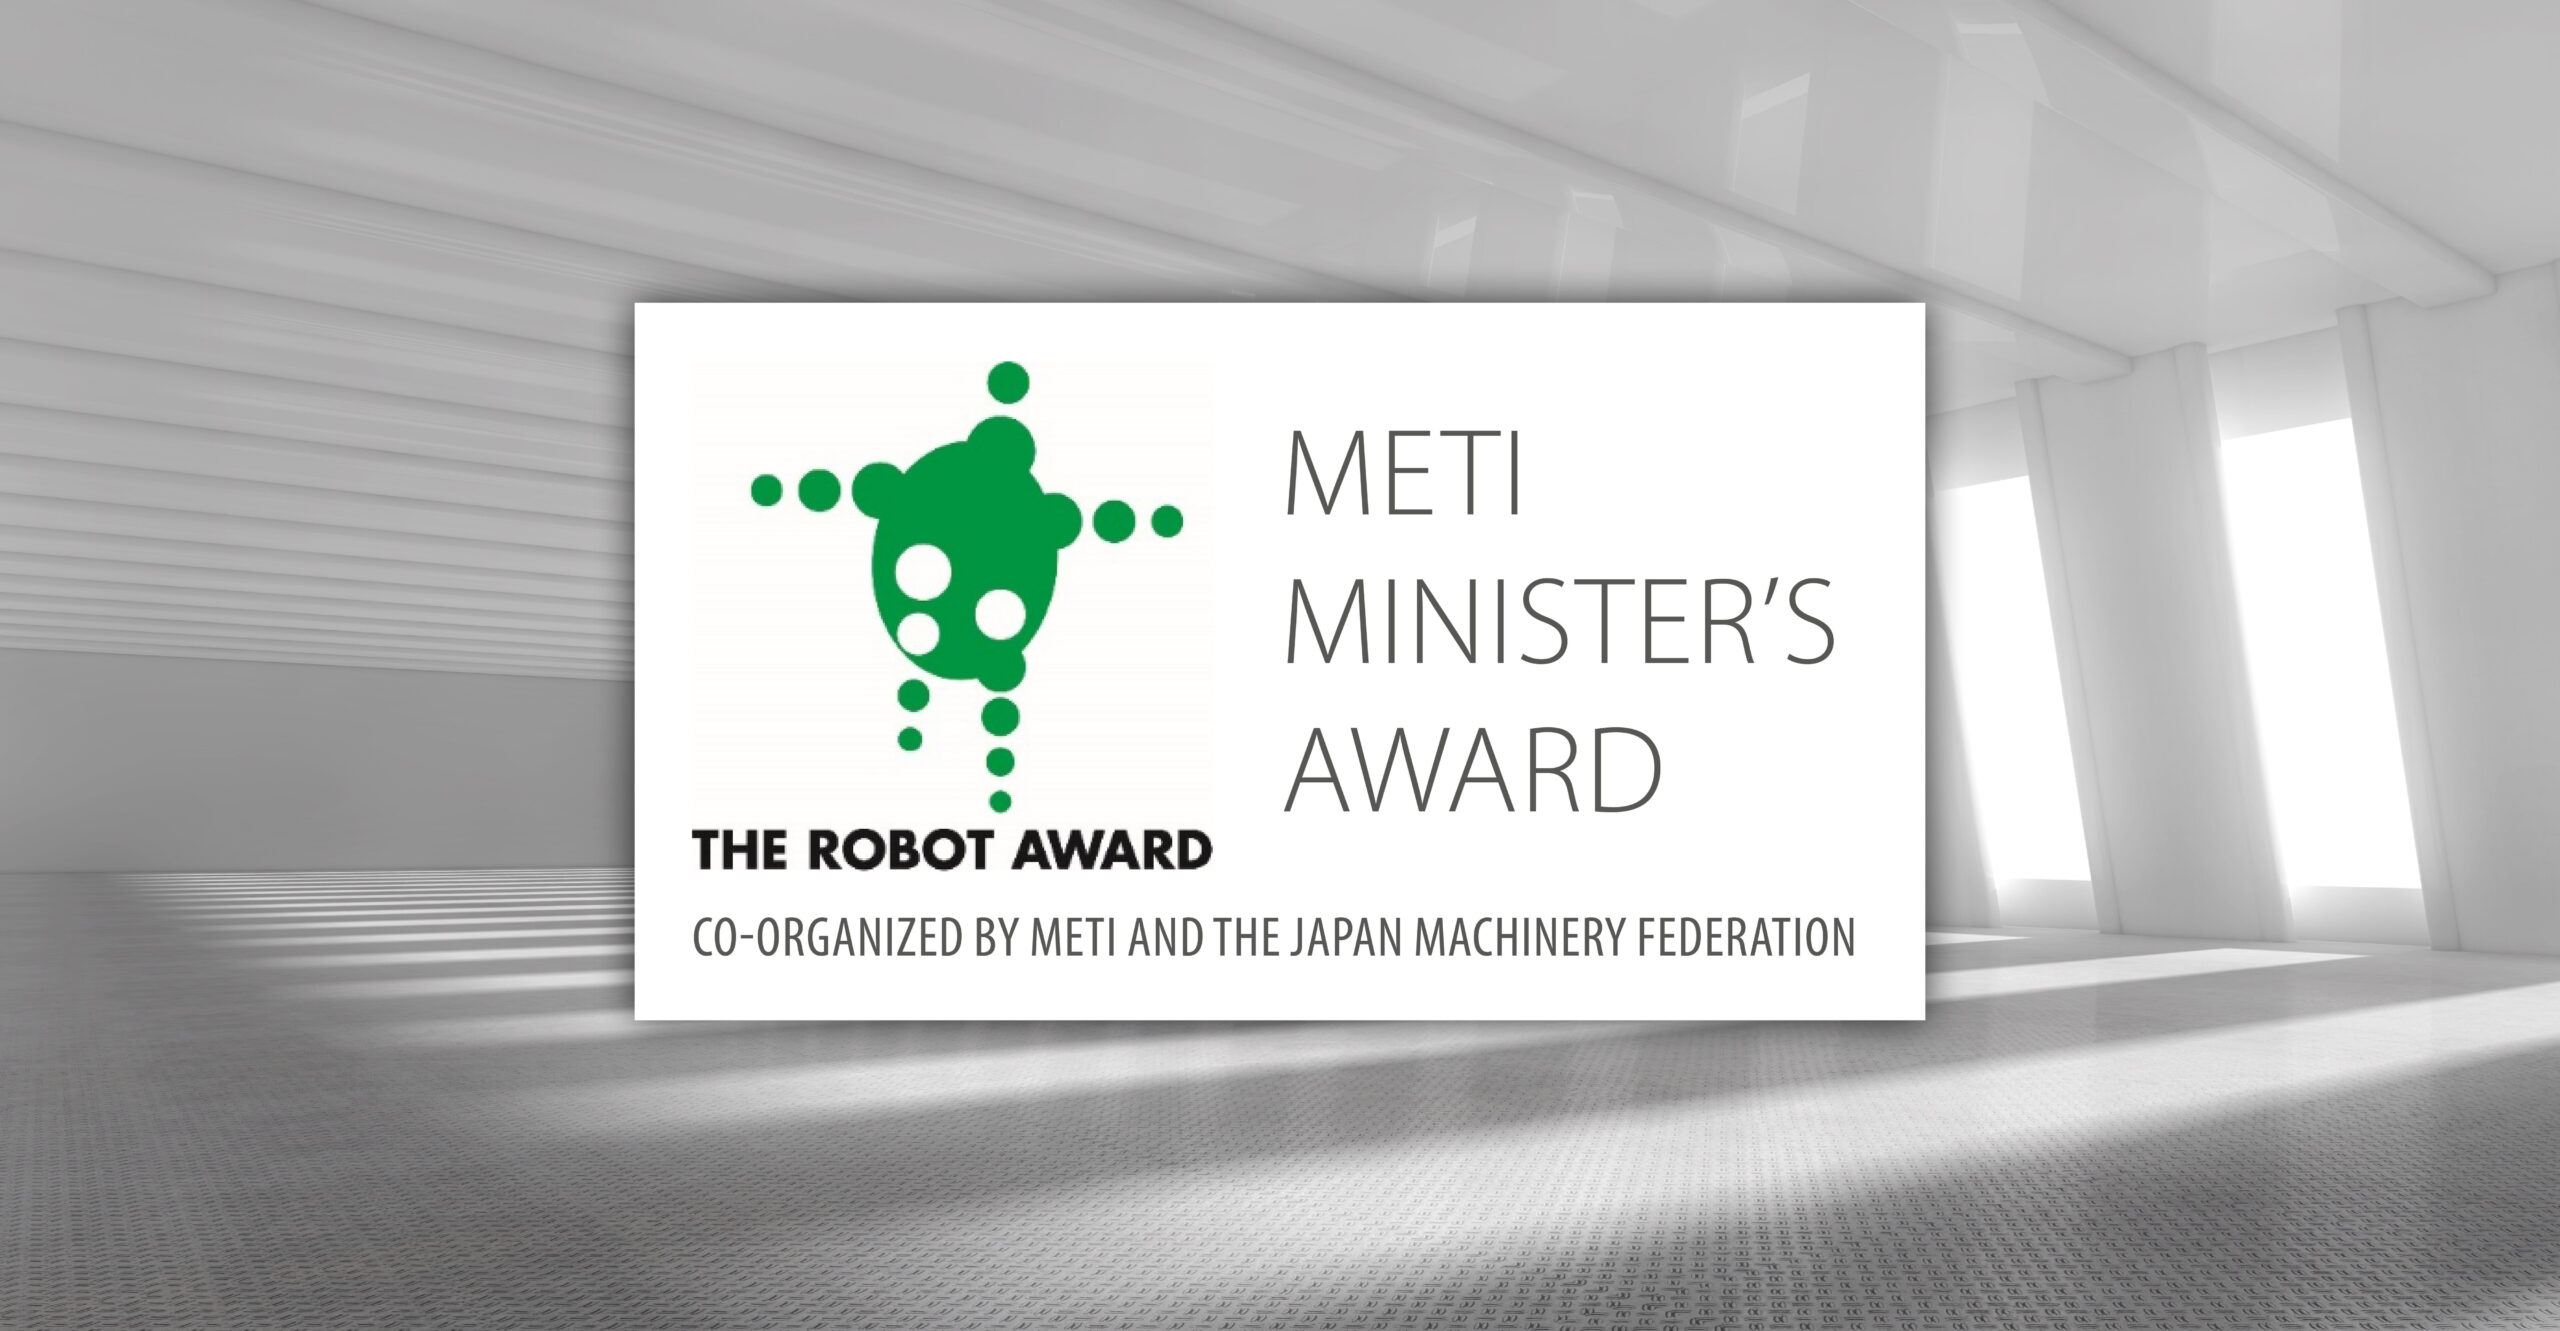 OMRON’s Mobile Robots Win the METI Minister’s Award at the 10th Robot Awards Program